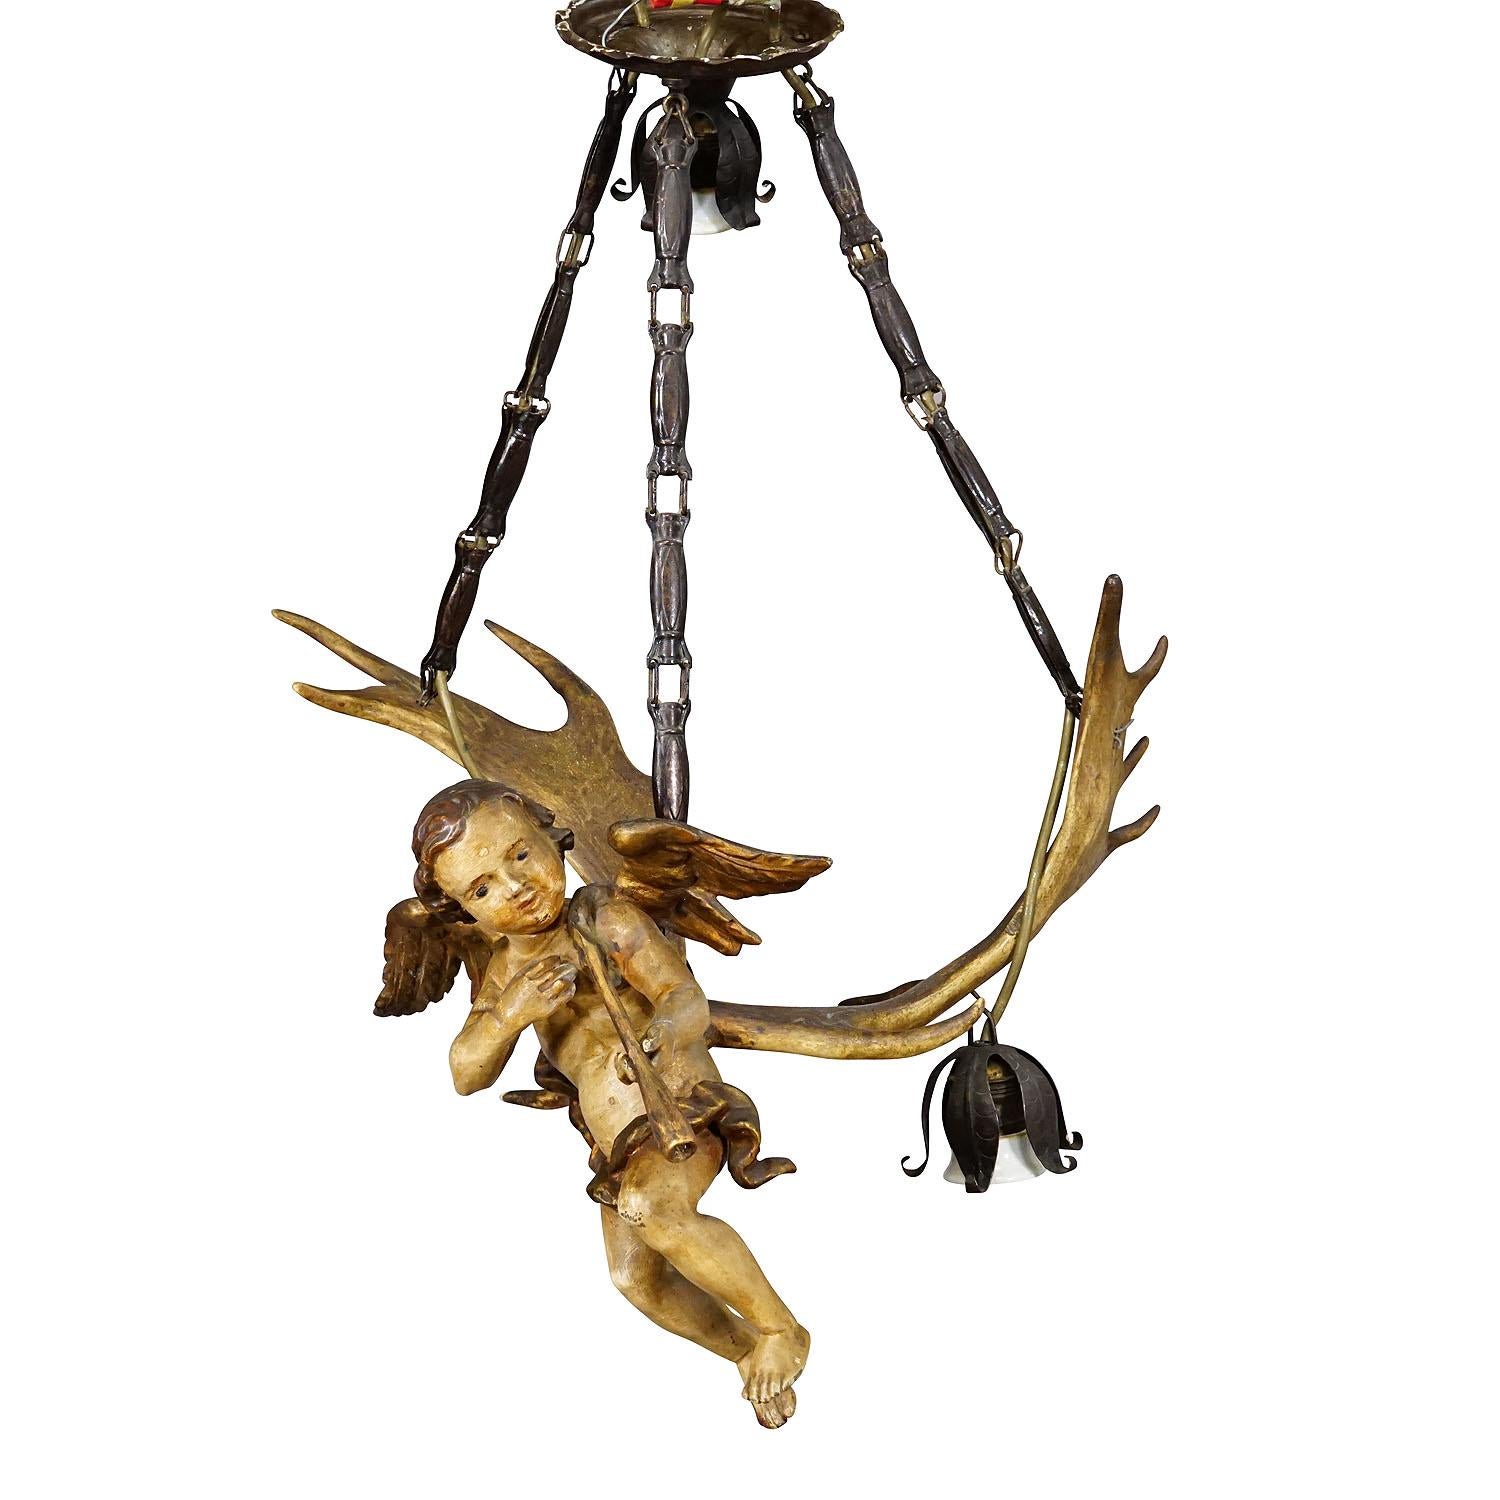 Antique Handcarved Lusterweibchen of an Angel ca. 1900

A lovely antique lusterweibchen chandelier depicting a fanfare playing angel. The sculpture is made of wood with handpainted finish and mounted on a pair of fallow deer antlers. It features a